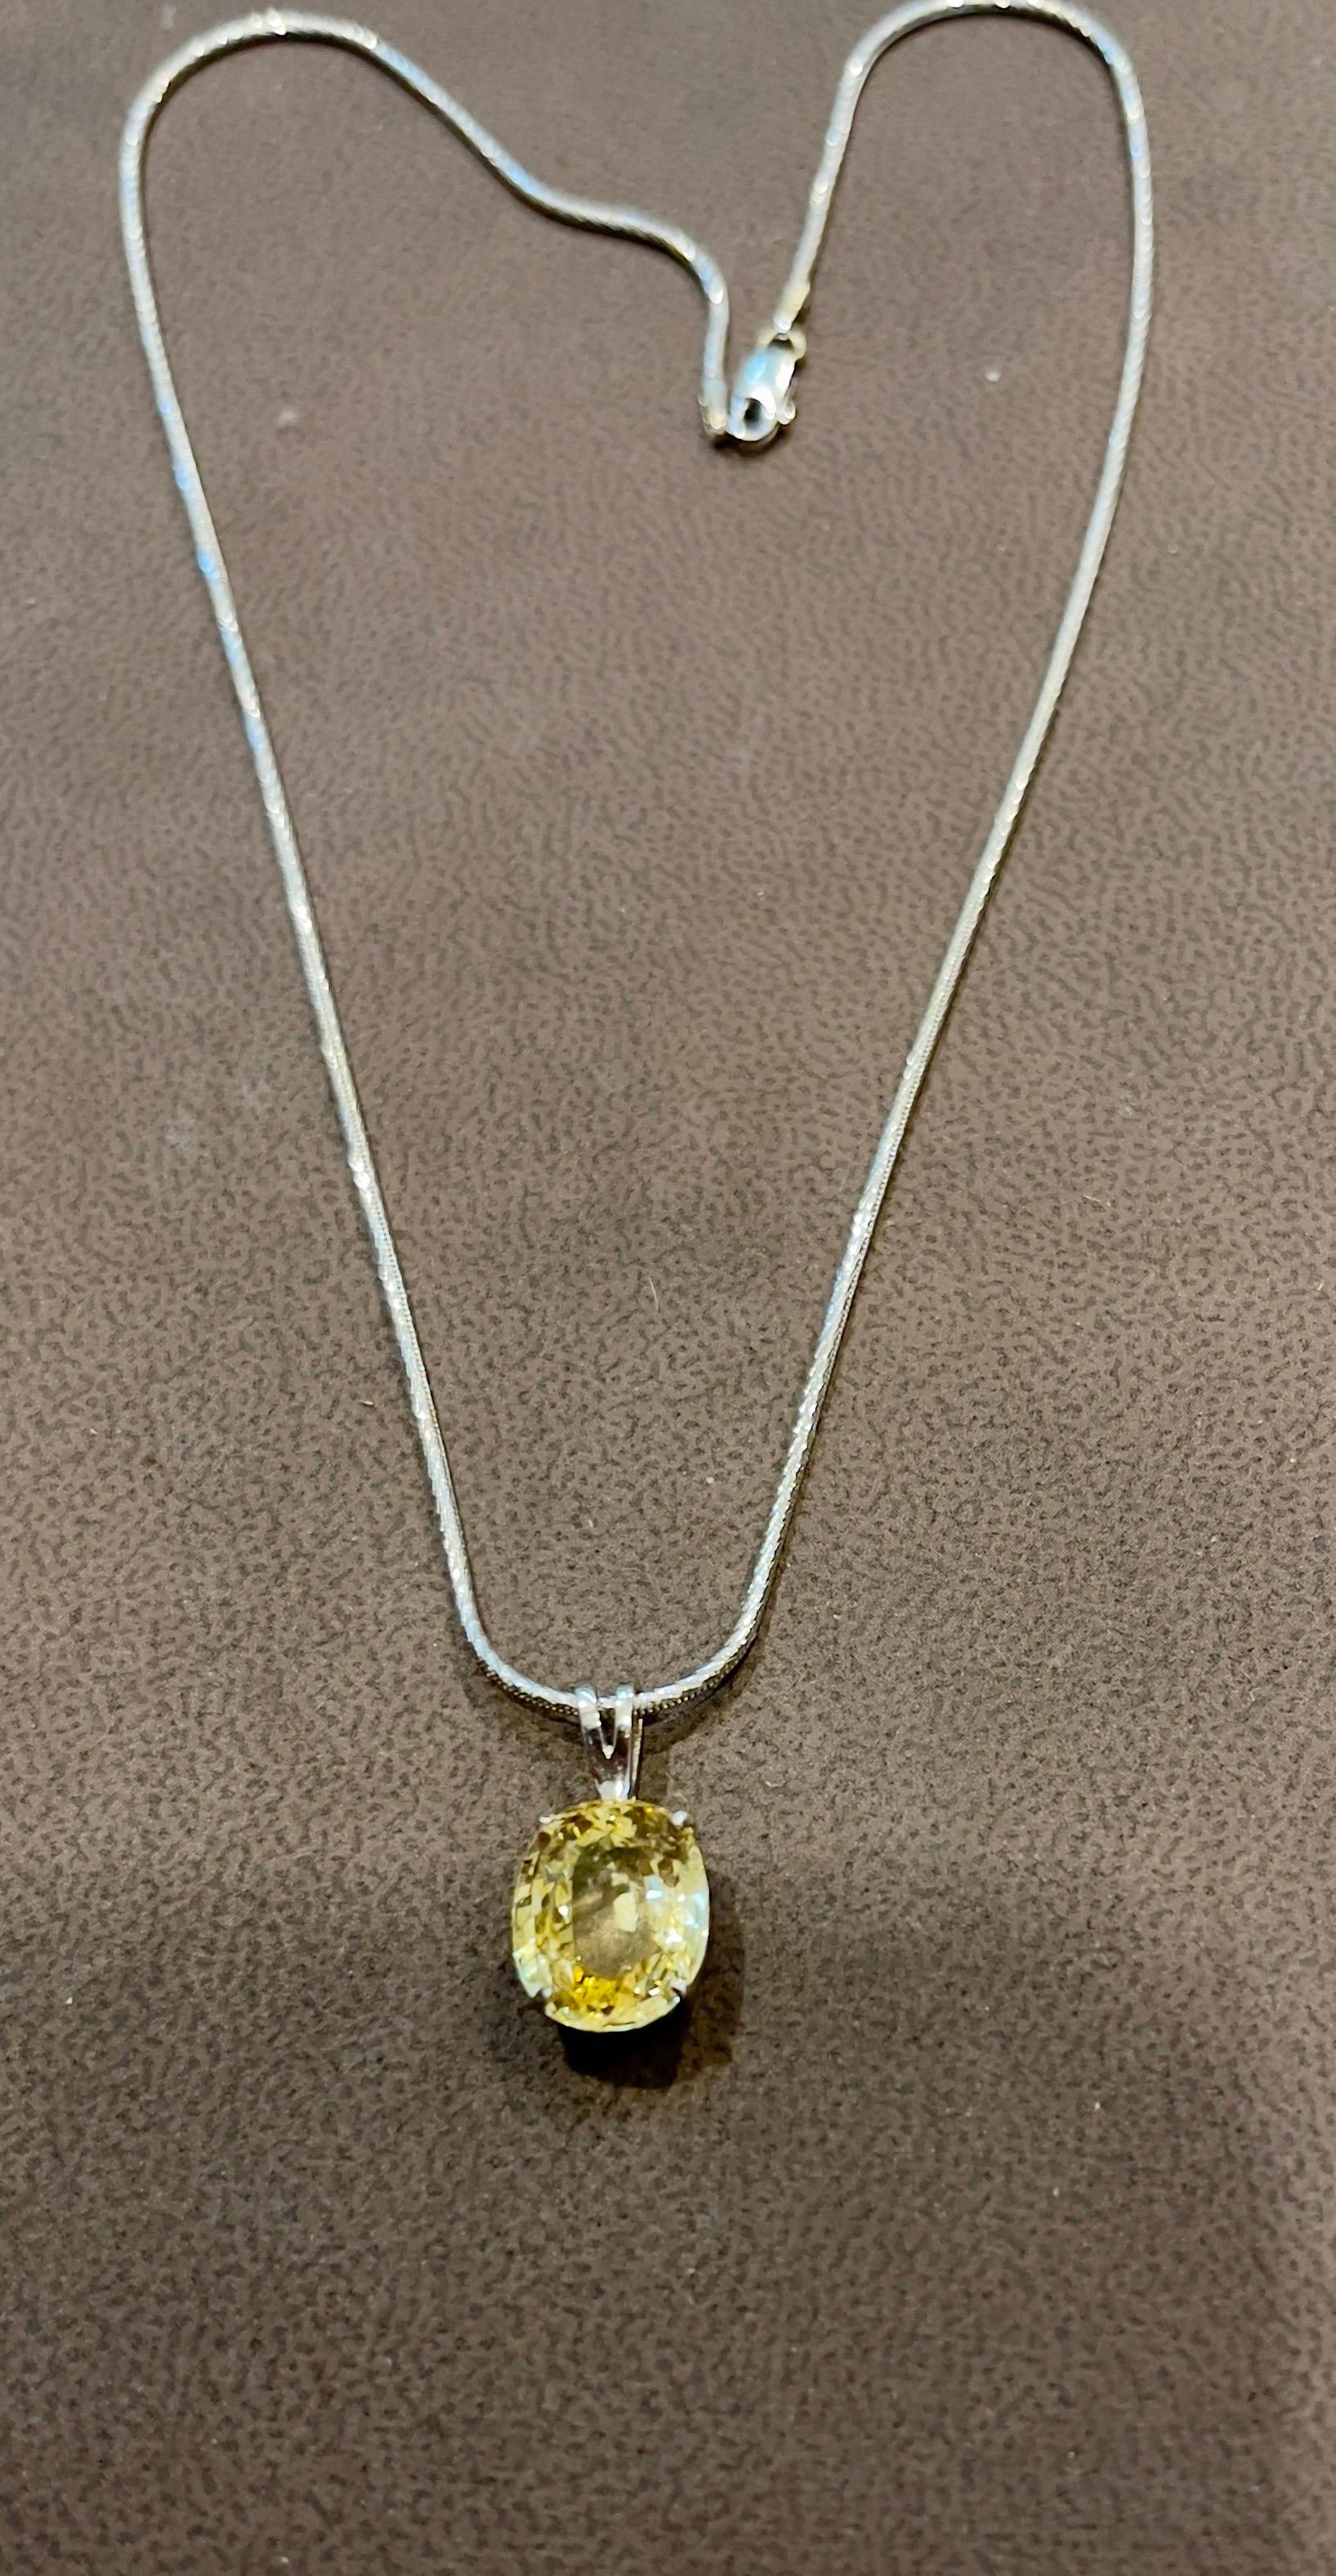 GIA Certified 5.56 Ct Natural Ceylon Yellow Sapphire Pendant Necklace white Gold For Sale 9